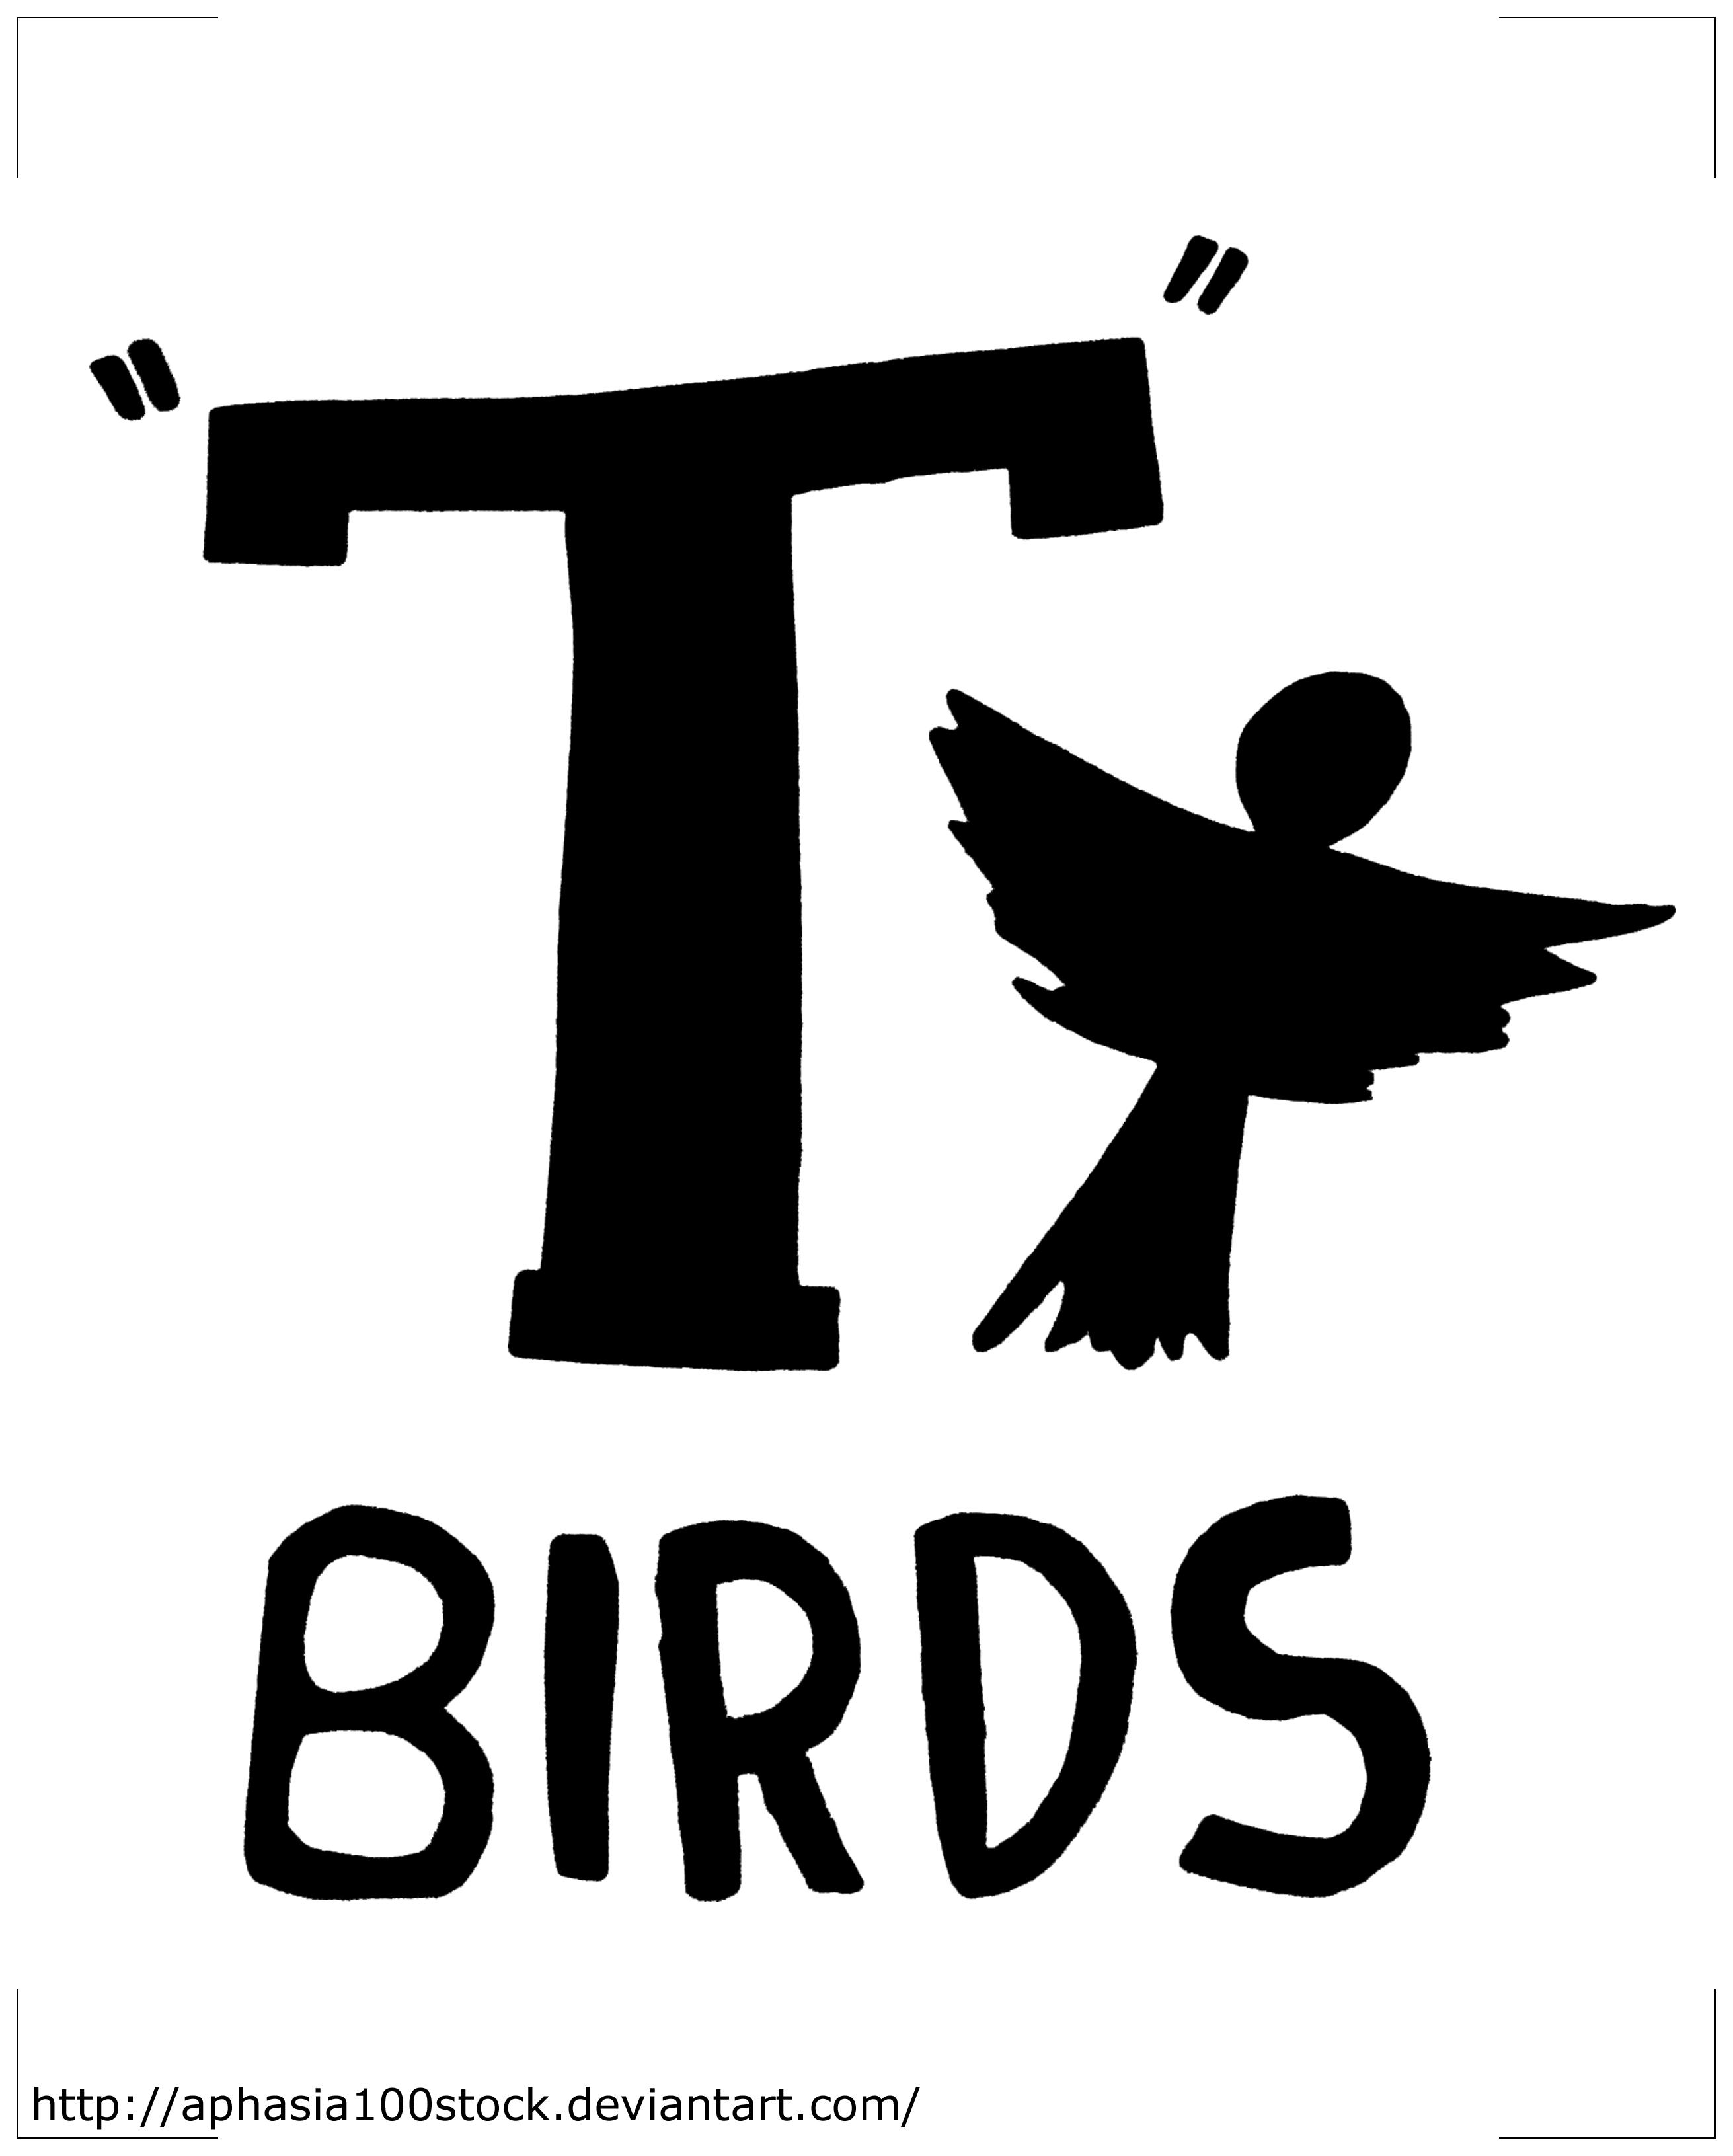 TBirds Template Printout by aphasia100stock on DeviantArt